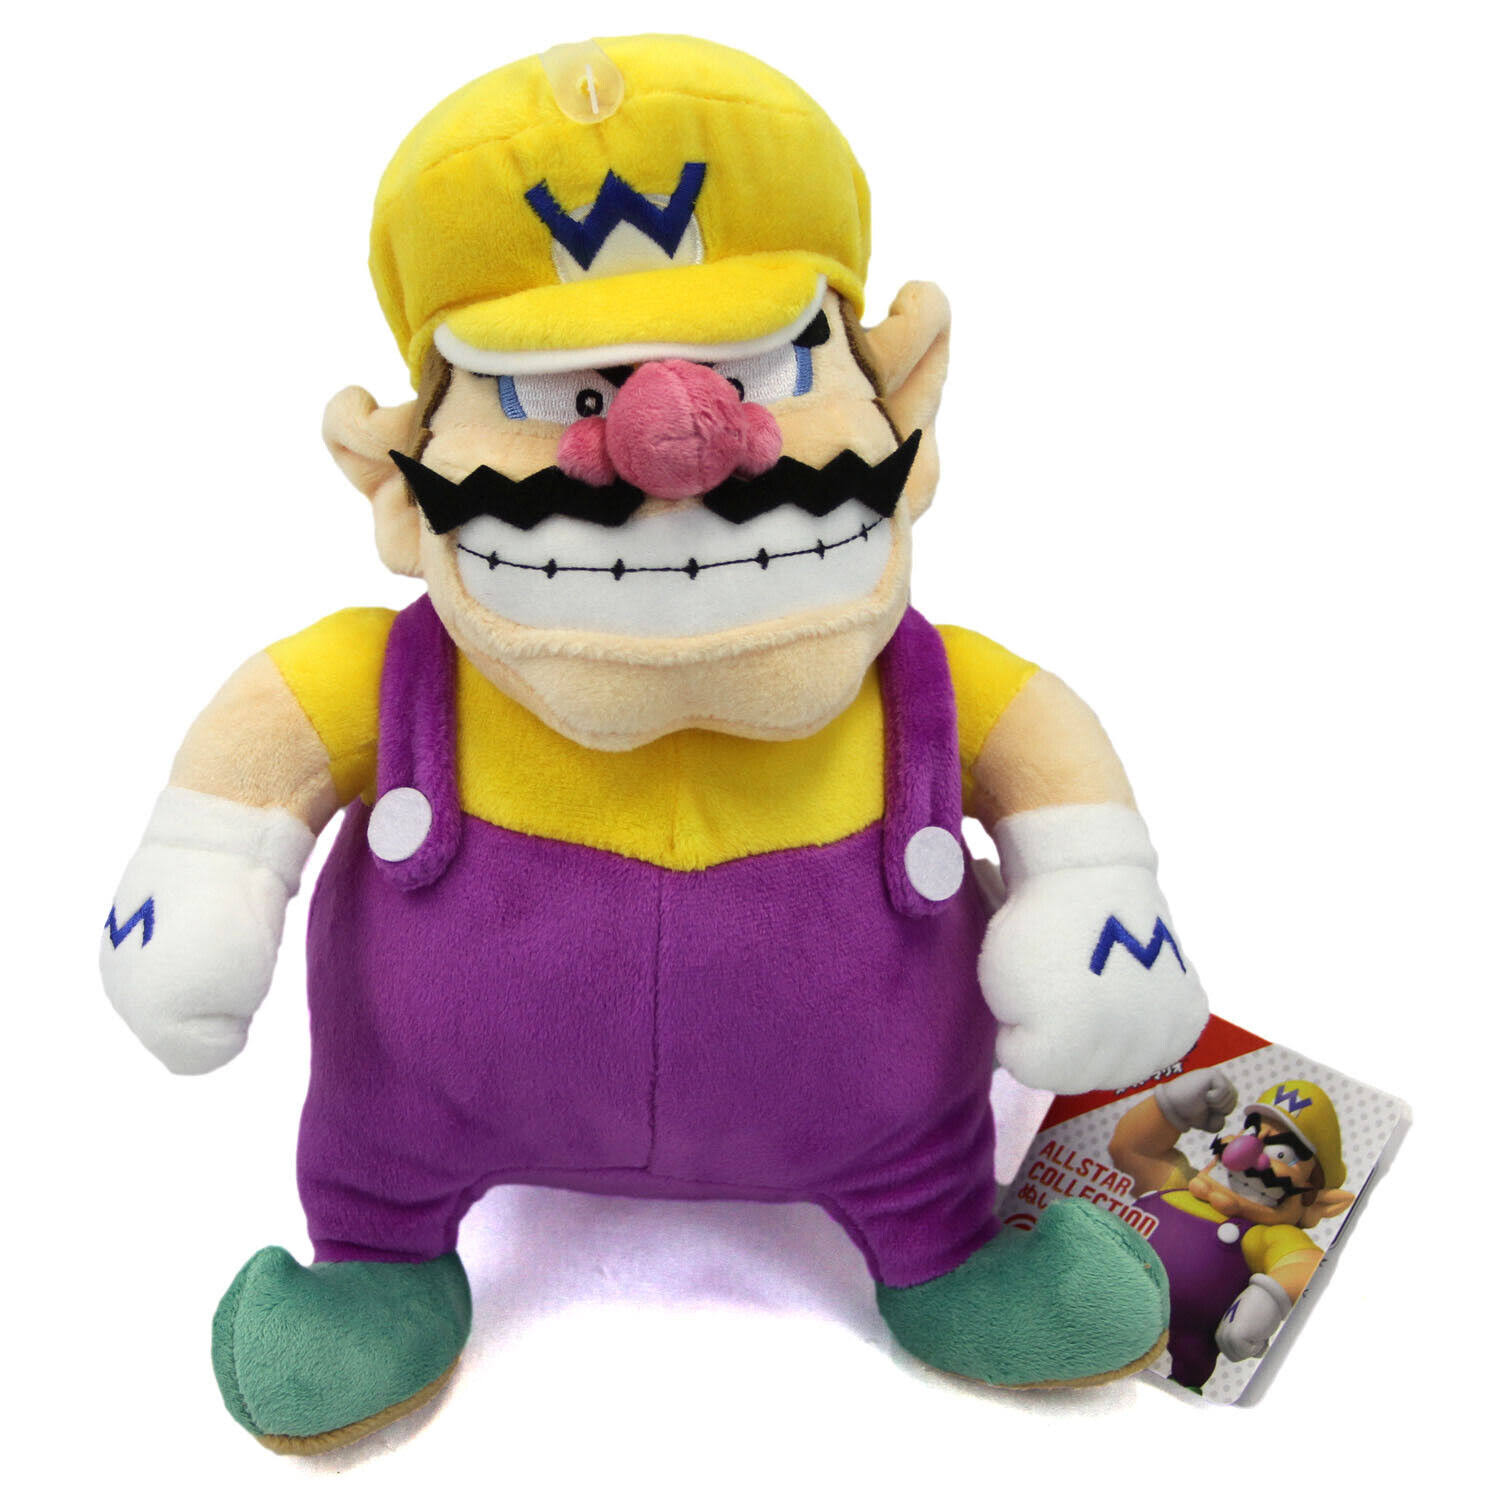 Little Buddy Super Mario All Star Collection Wario Stuffed Plush Toy - 10"